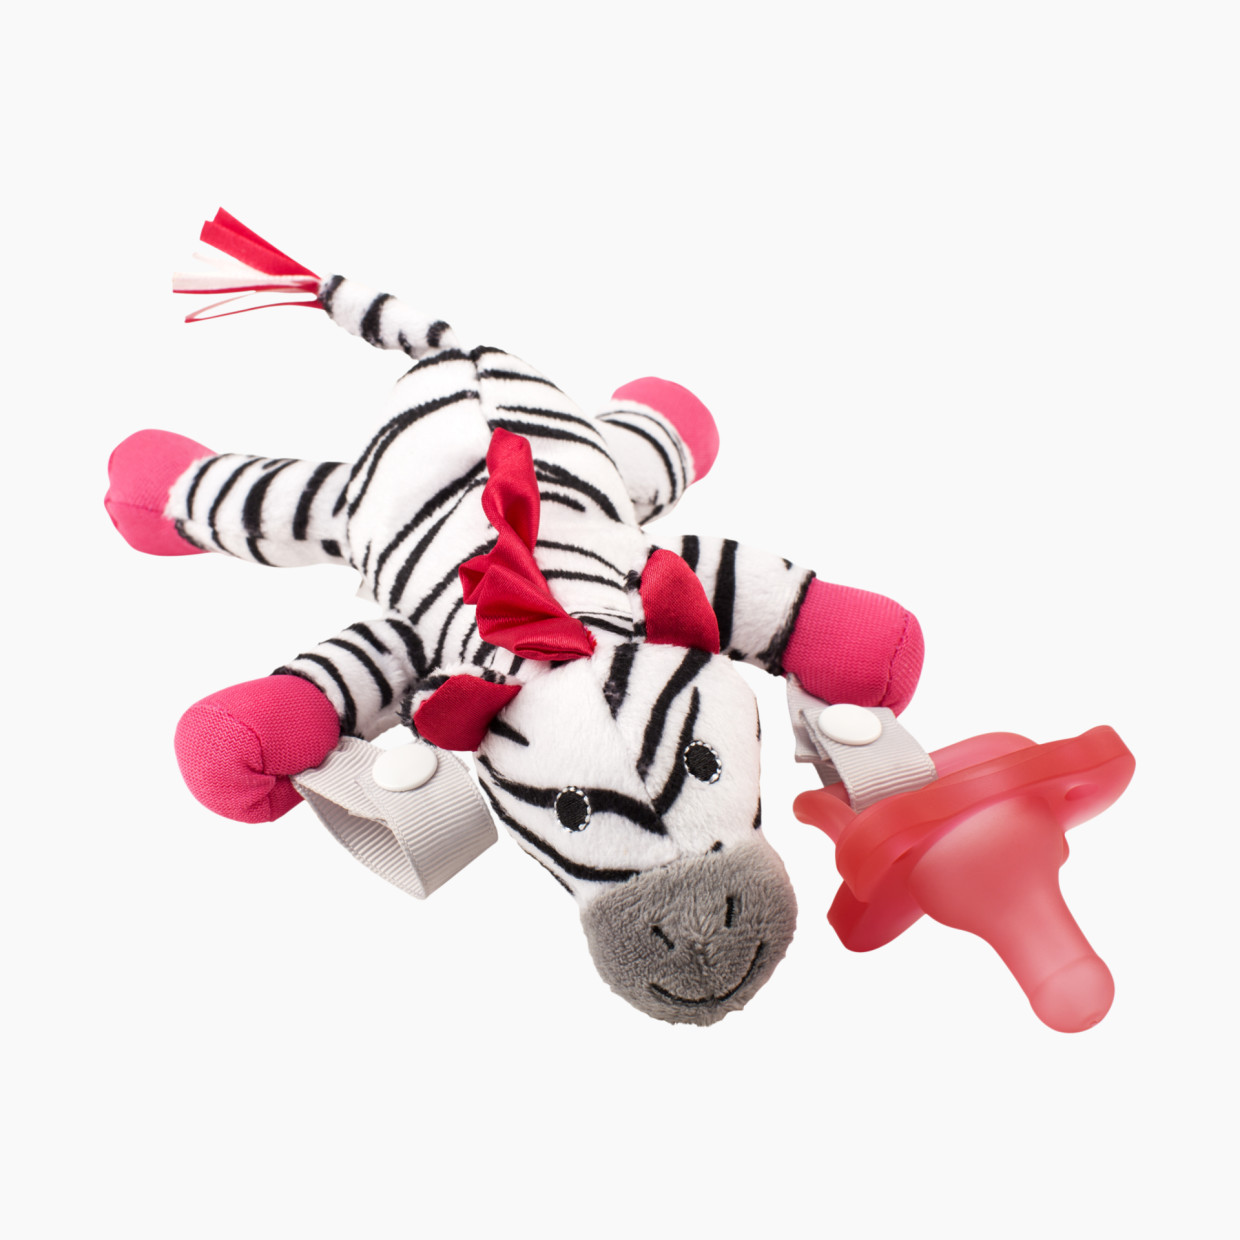 Dr. Brown's Lovey With One-Piece Pacifier - Zebra.